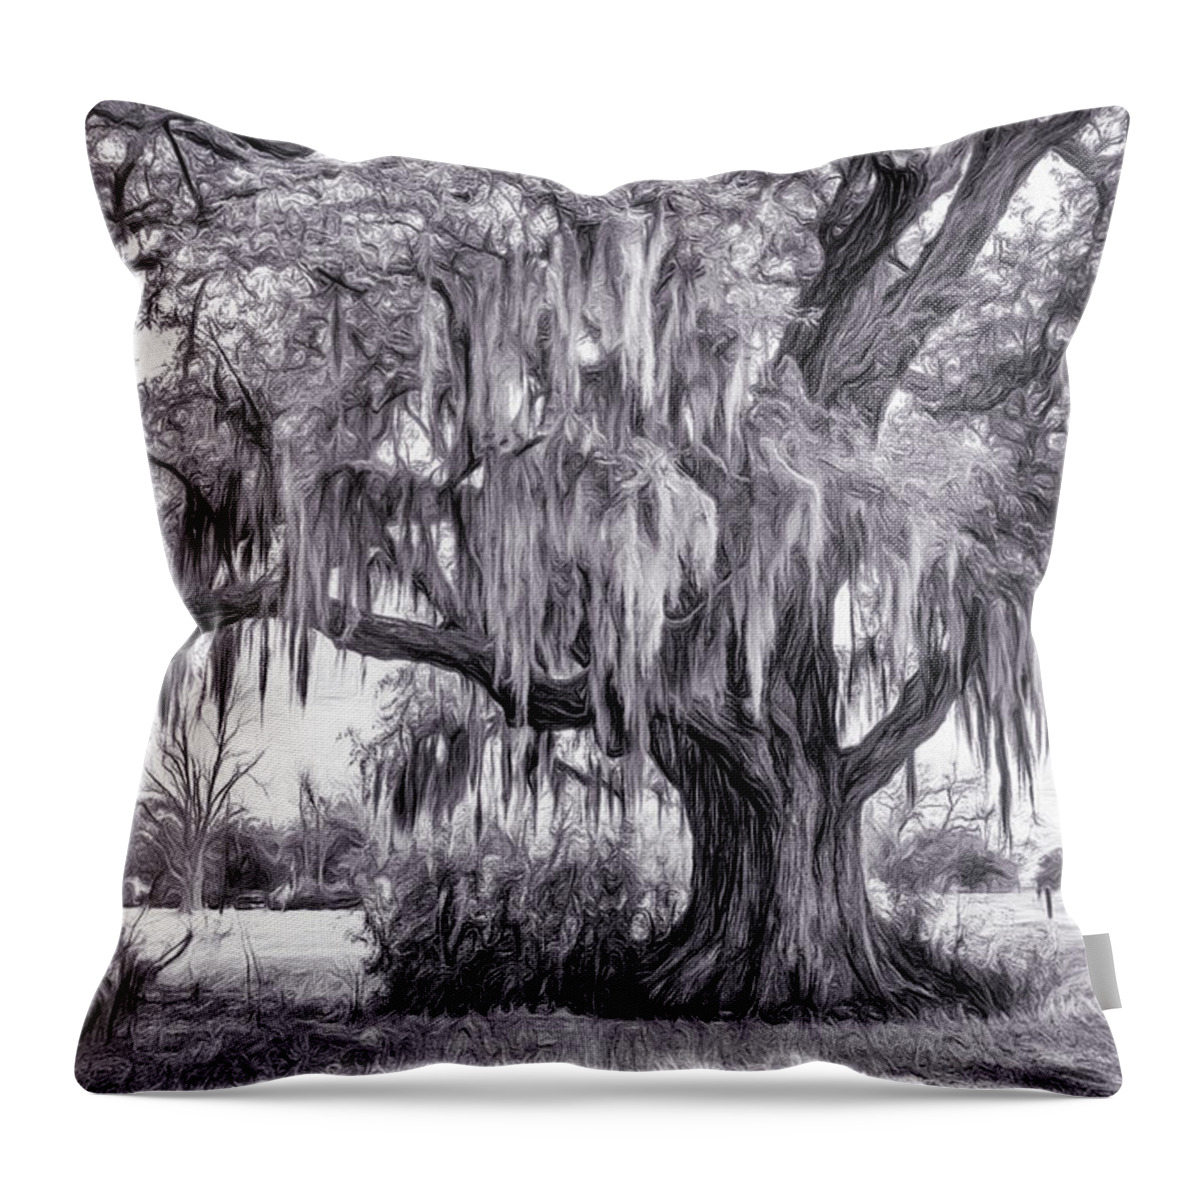 Evergreen Plantation Throw Pillow featuring the photograph Live Oak and Spanish Moss - Paint BW 2 by Steve Harrington